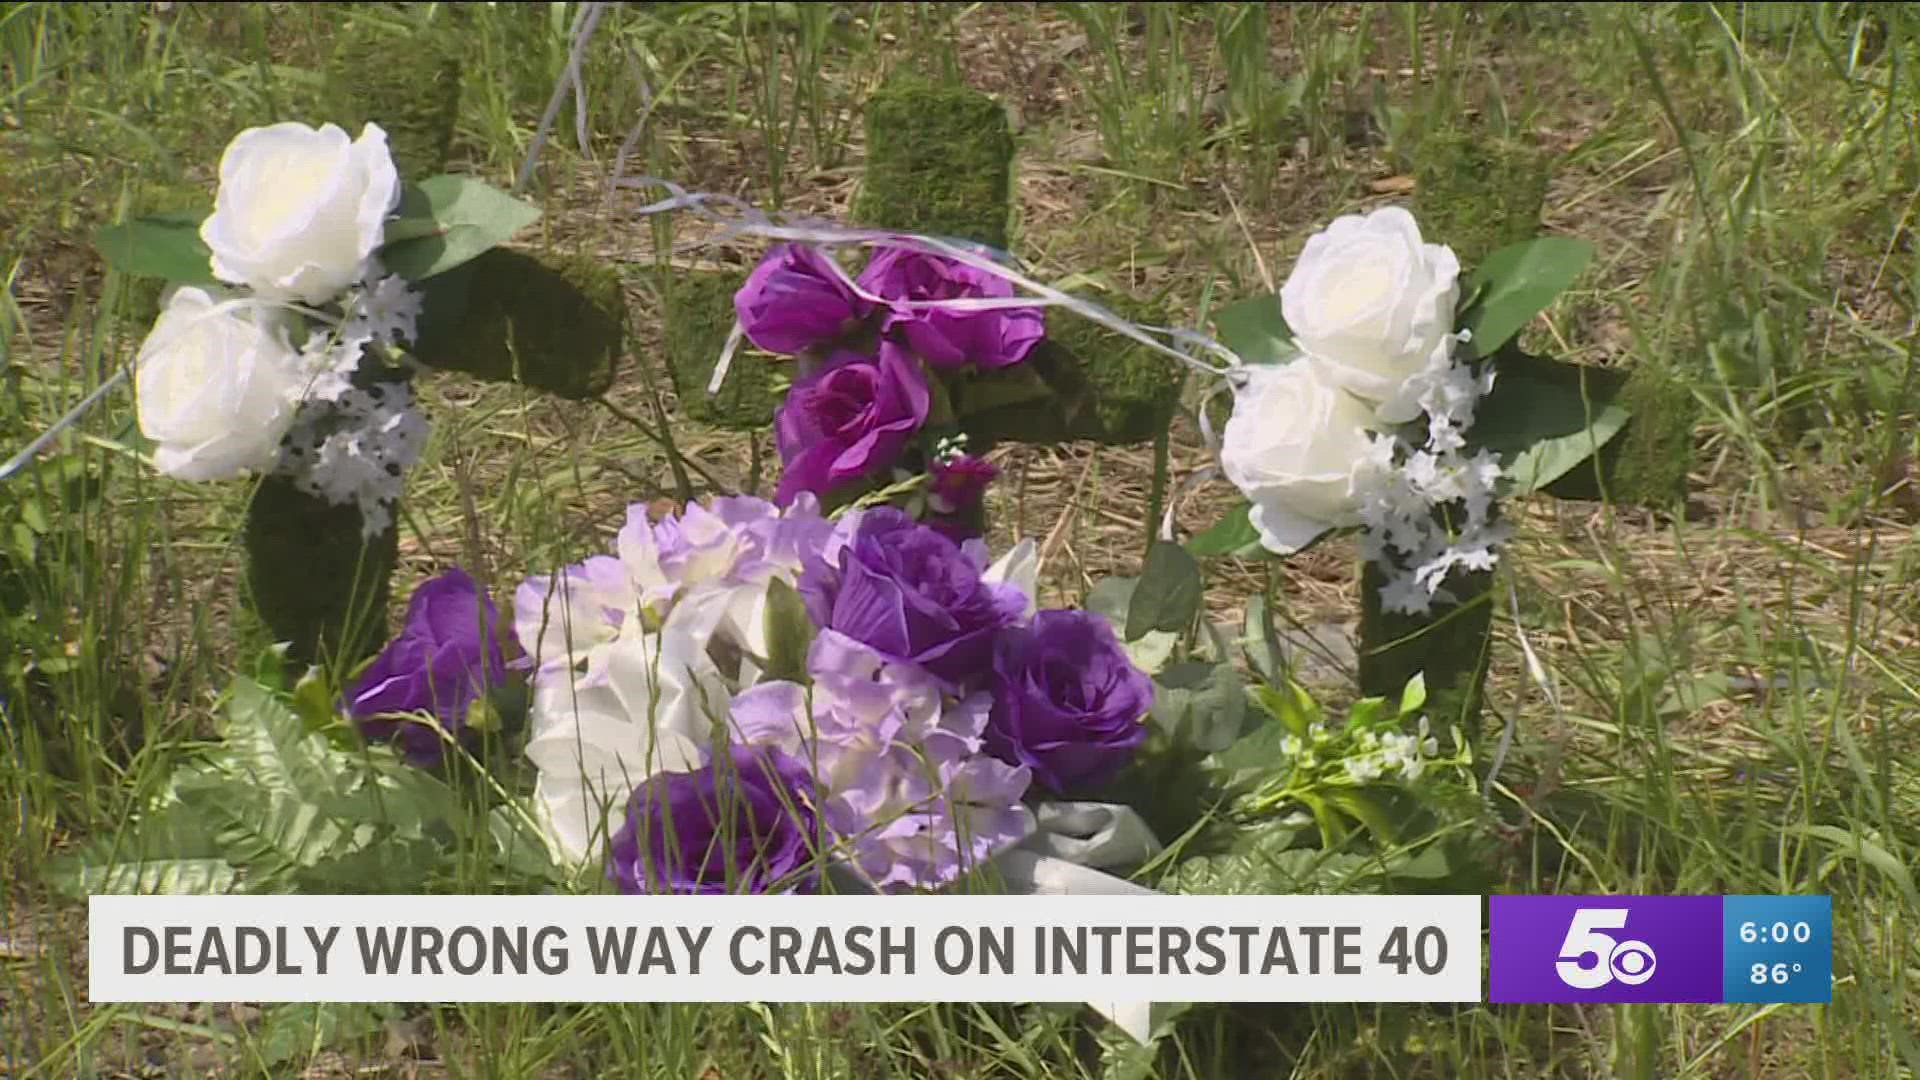 Many people at the scene 5NEWS spoke with called it the most horrific crash they have seen.